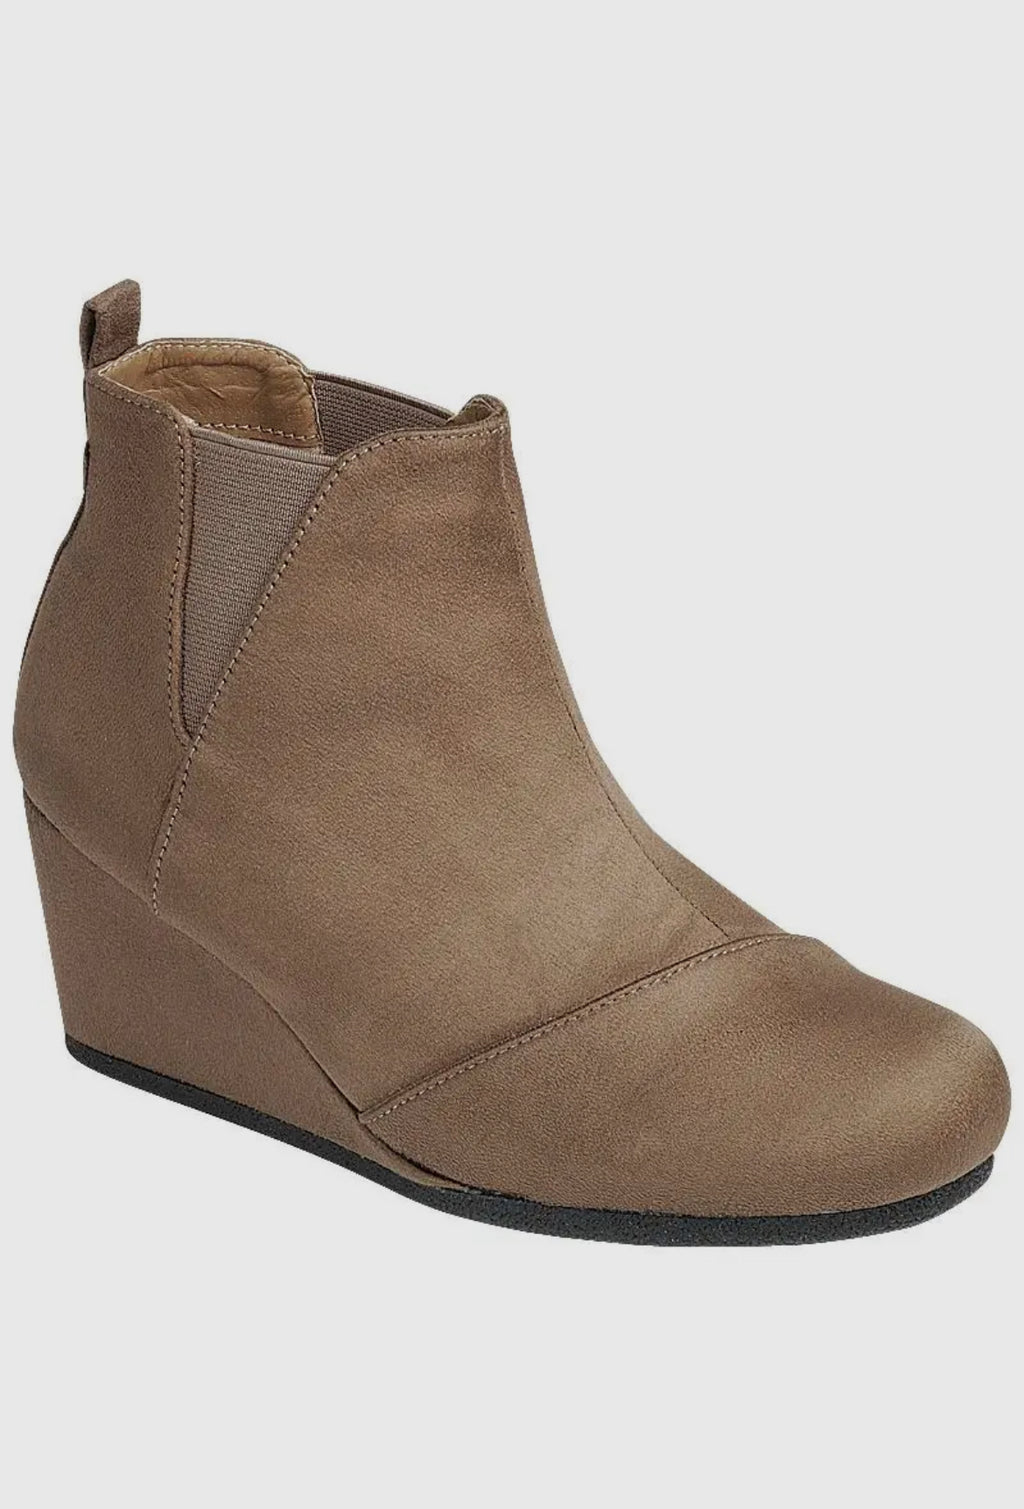 Taupe Faux Suede Wedge